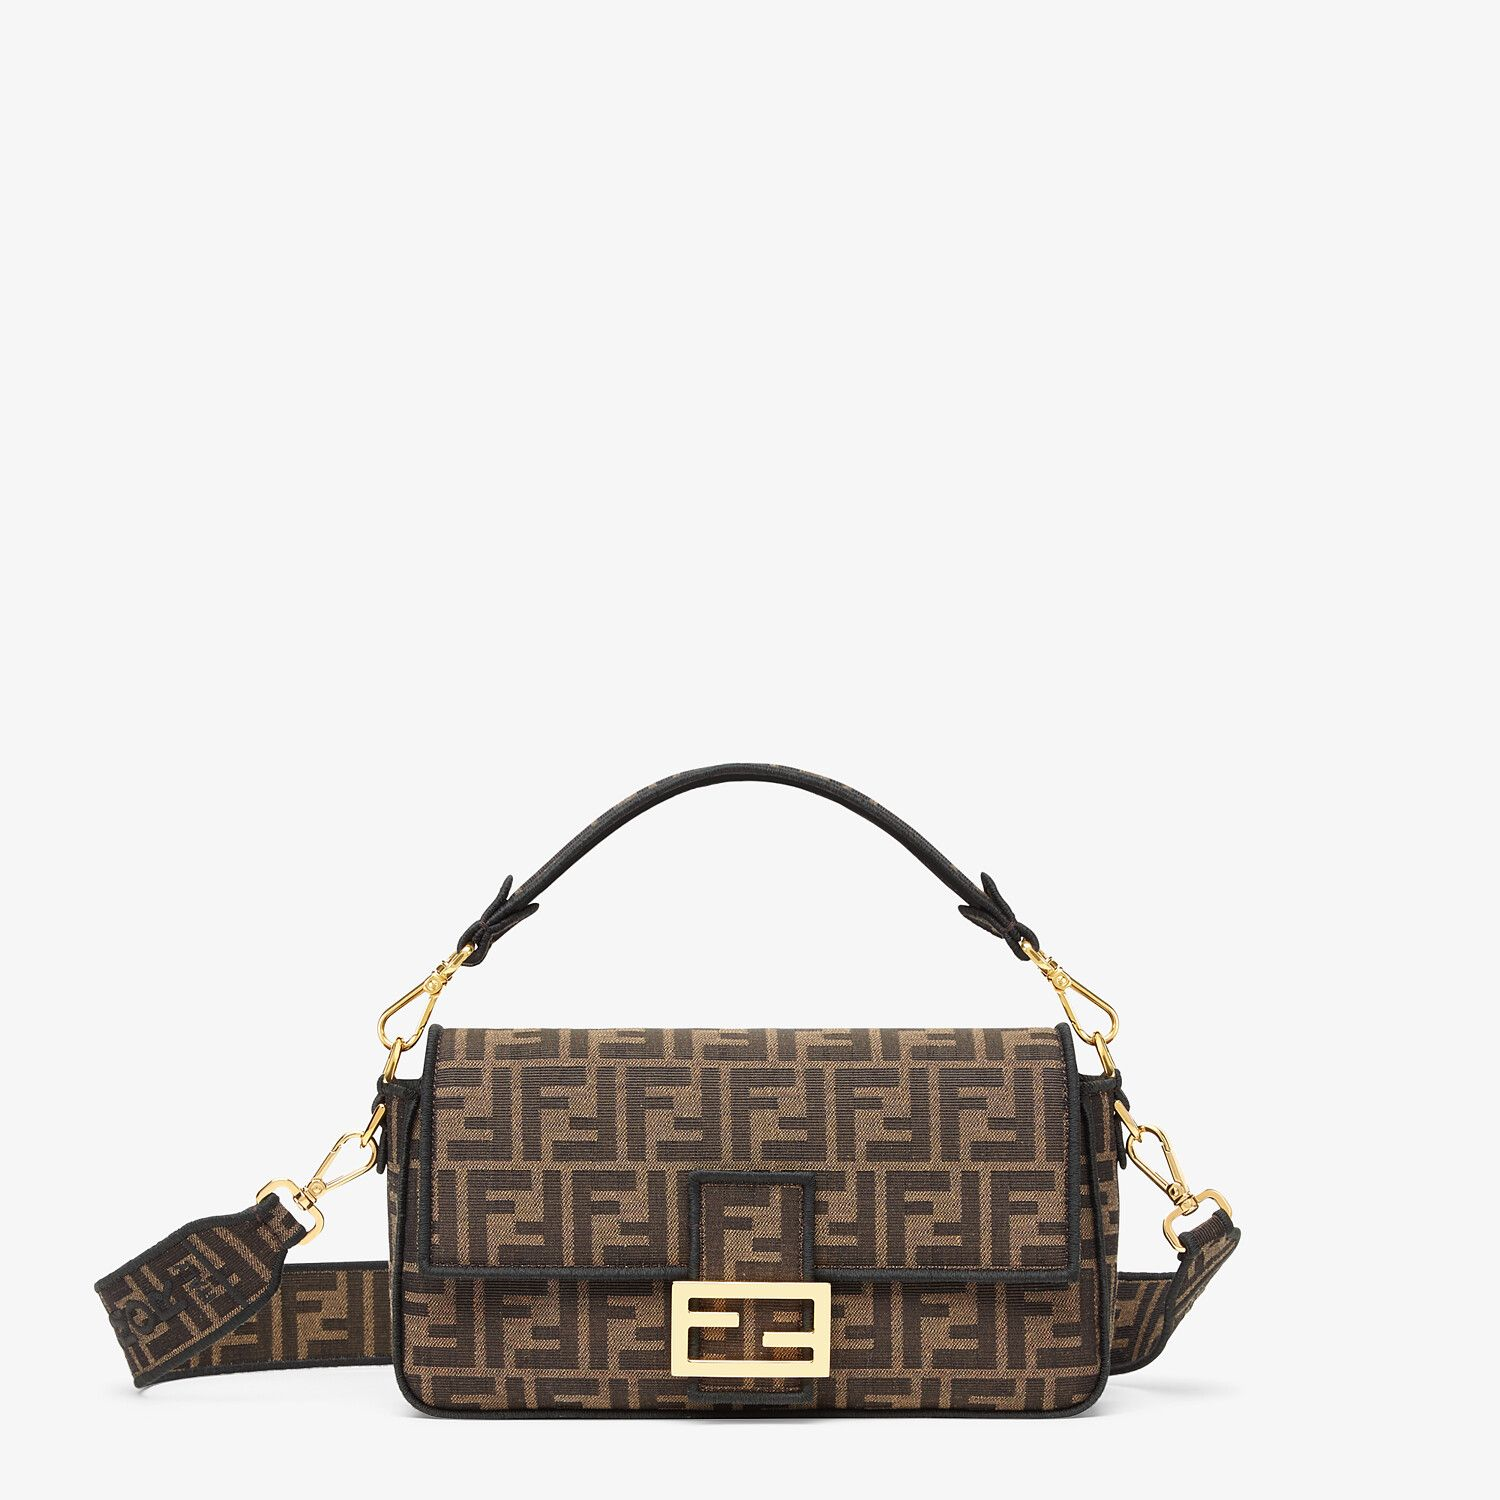 Vintage Chanel and Louis Vuitton Handbags Reach High Values on Rebag – WWD